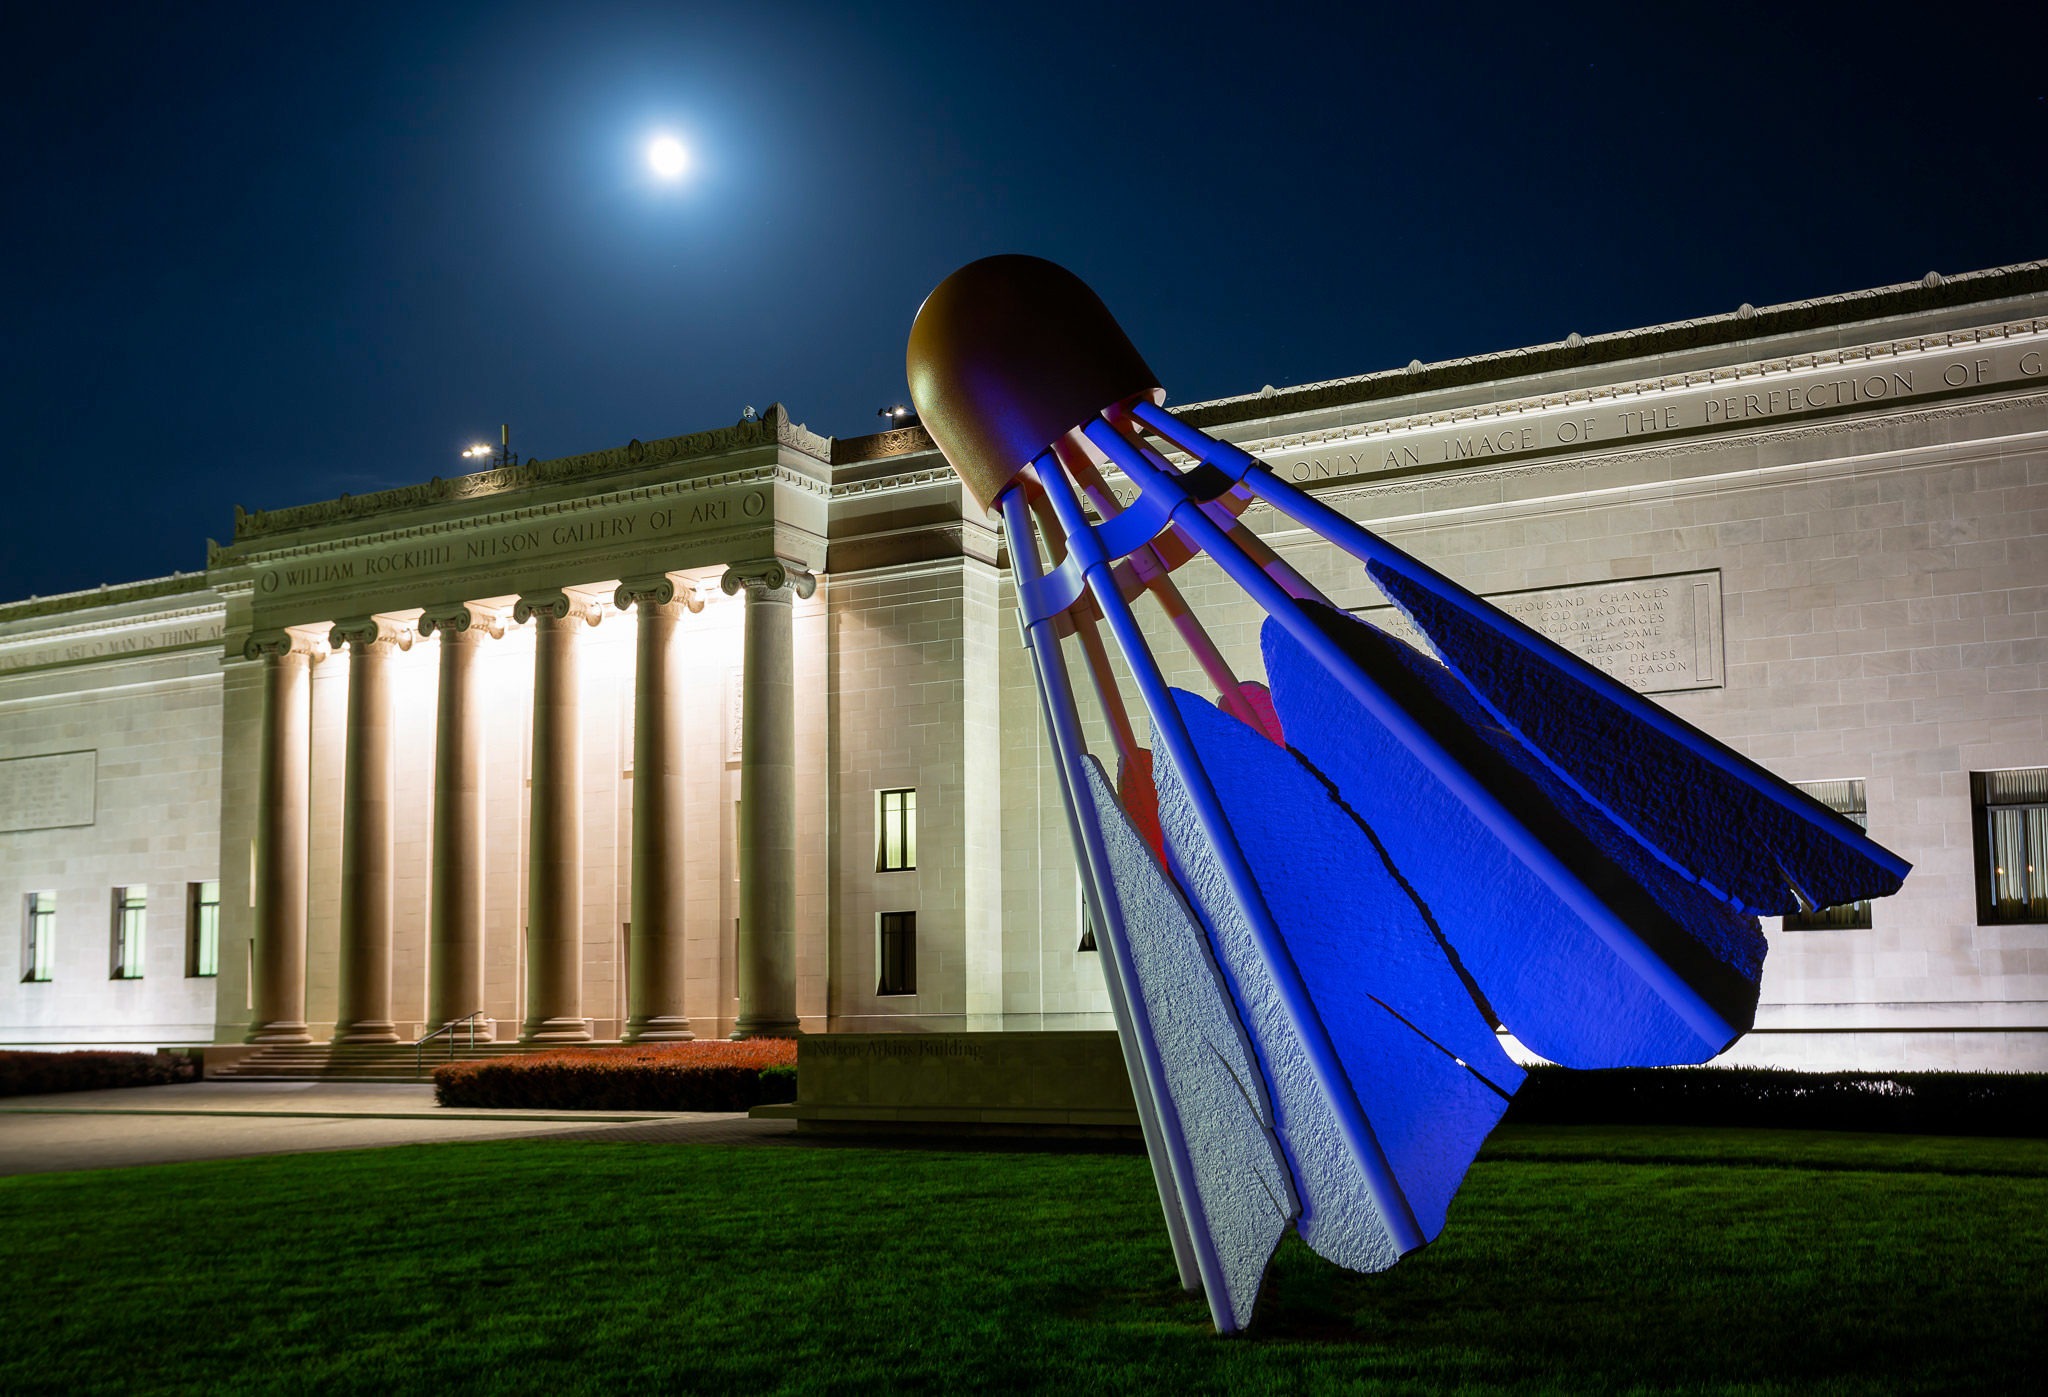 A nighttime photo of a sculpture in front of an art museum.